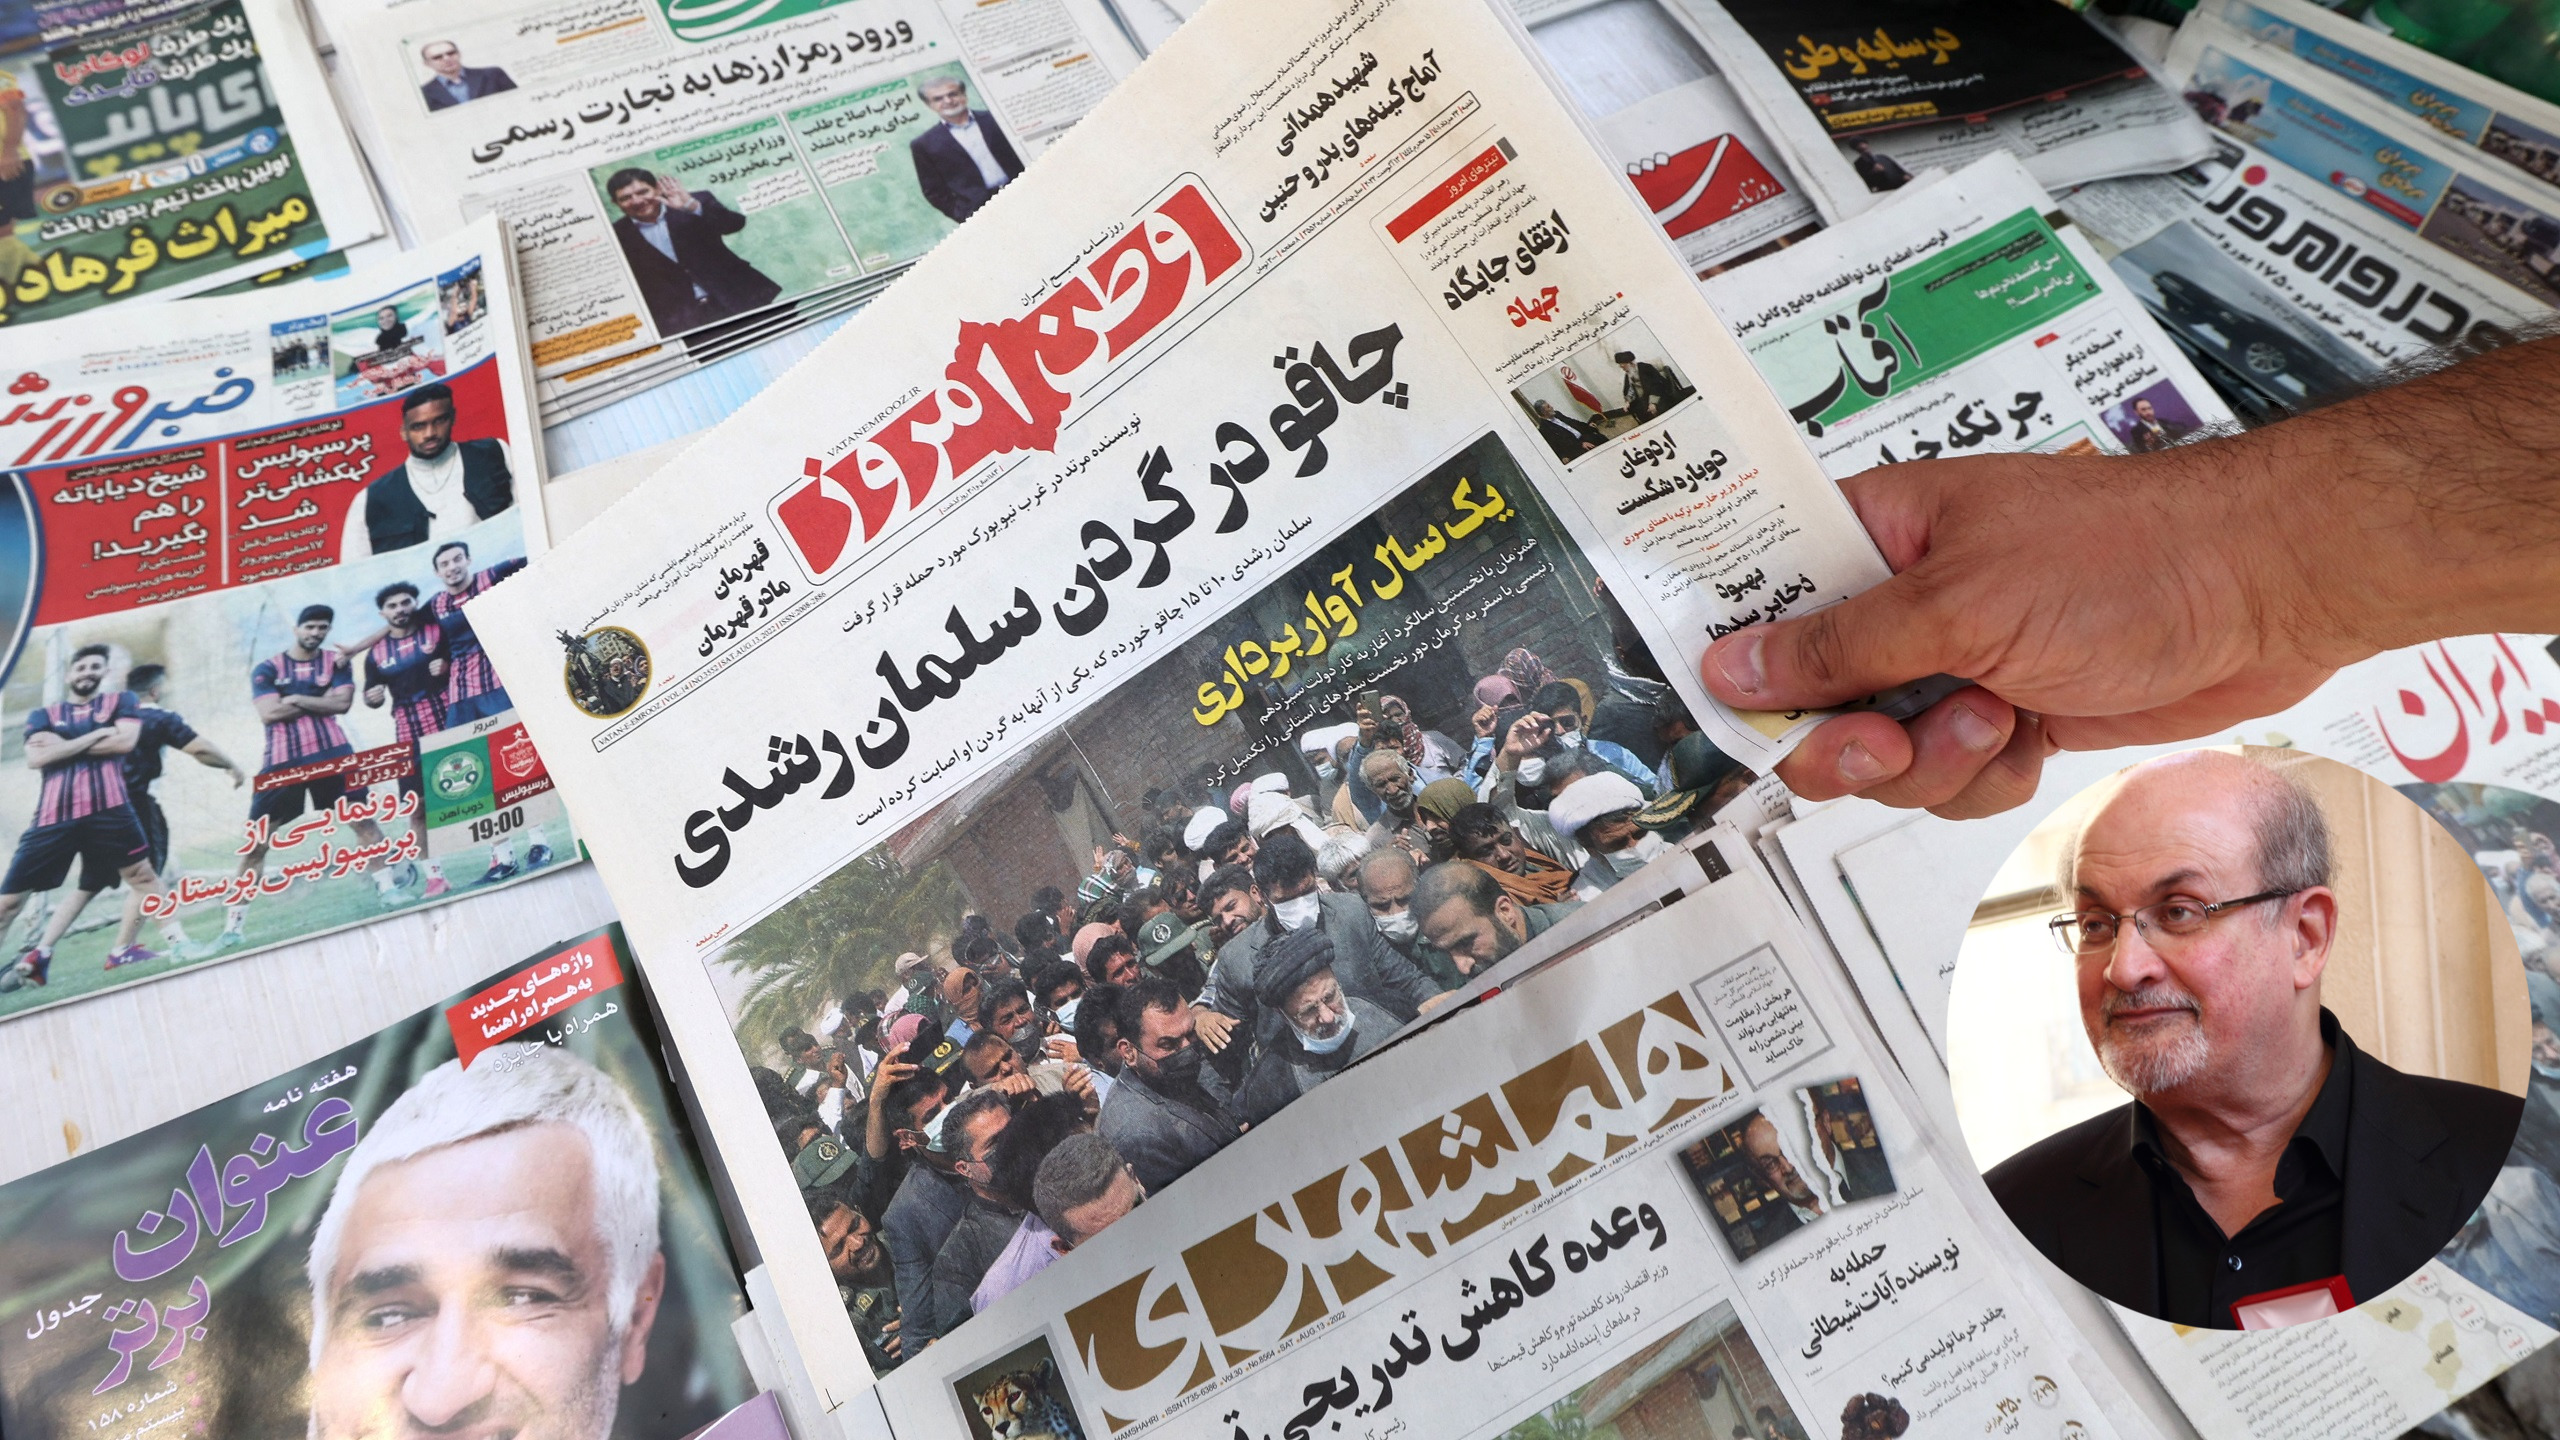 Iranian Newspapers Laud Salman Rushdie’s Attacker [with VIDEO]